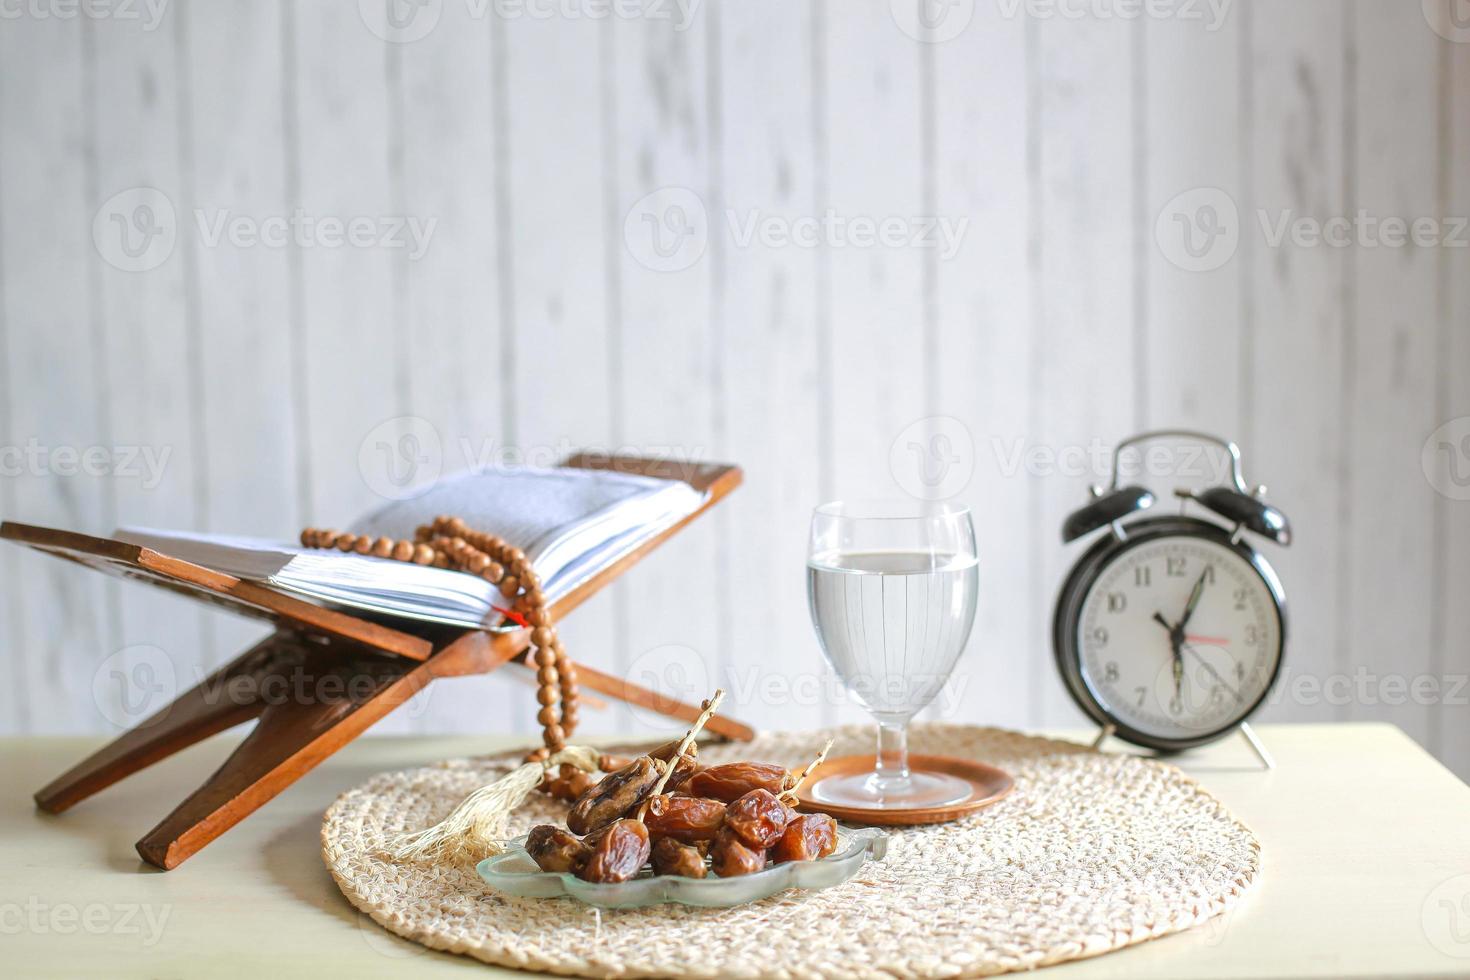 Kurma or dates fruit with glass of mineral water, holy book Al-Quran, alarm clock and prayer beads on the table. Traditional Ramadan, iftar meal. Ramadan kareem fasting month concept photo